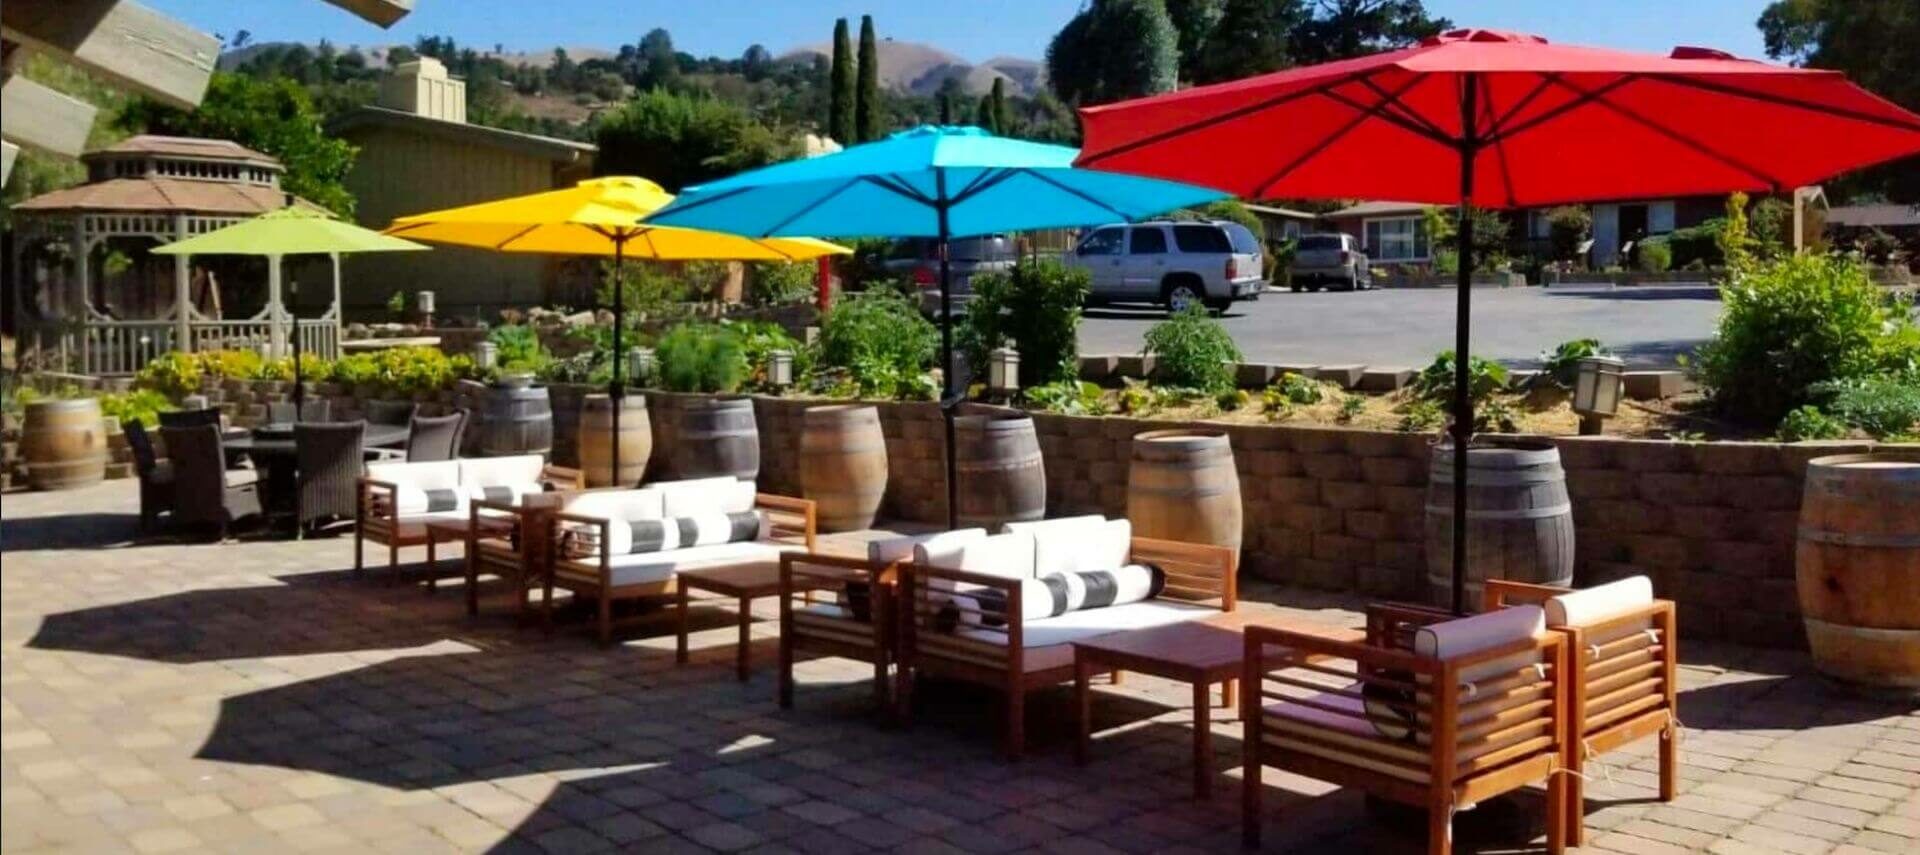 Outdoor patio at Carmel Valley Lodge